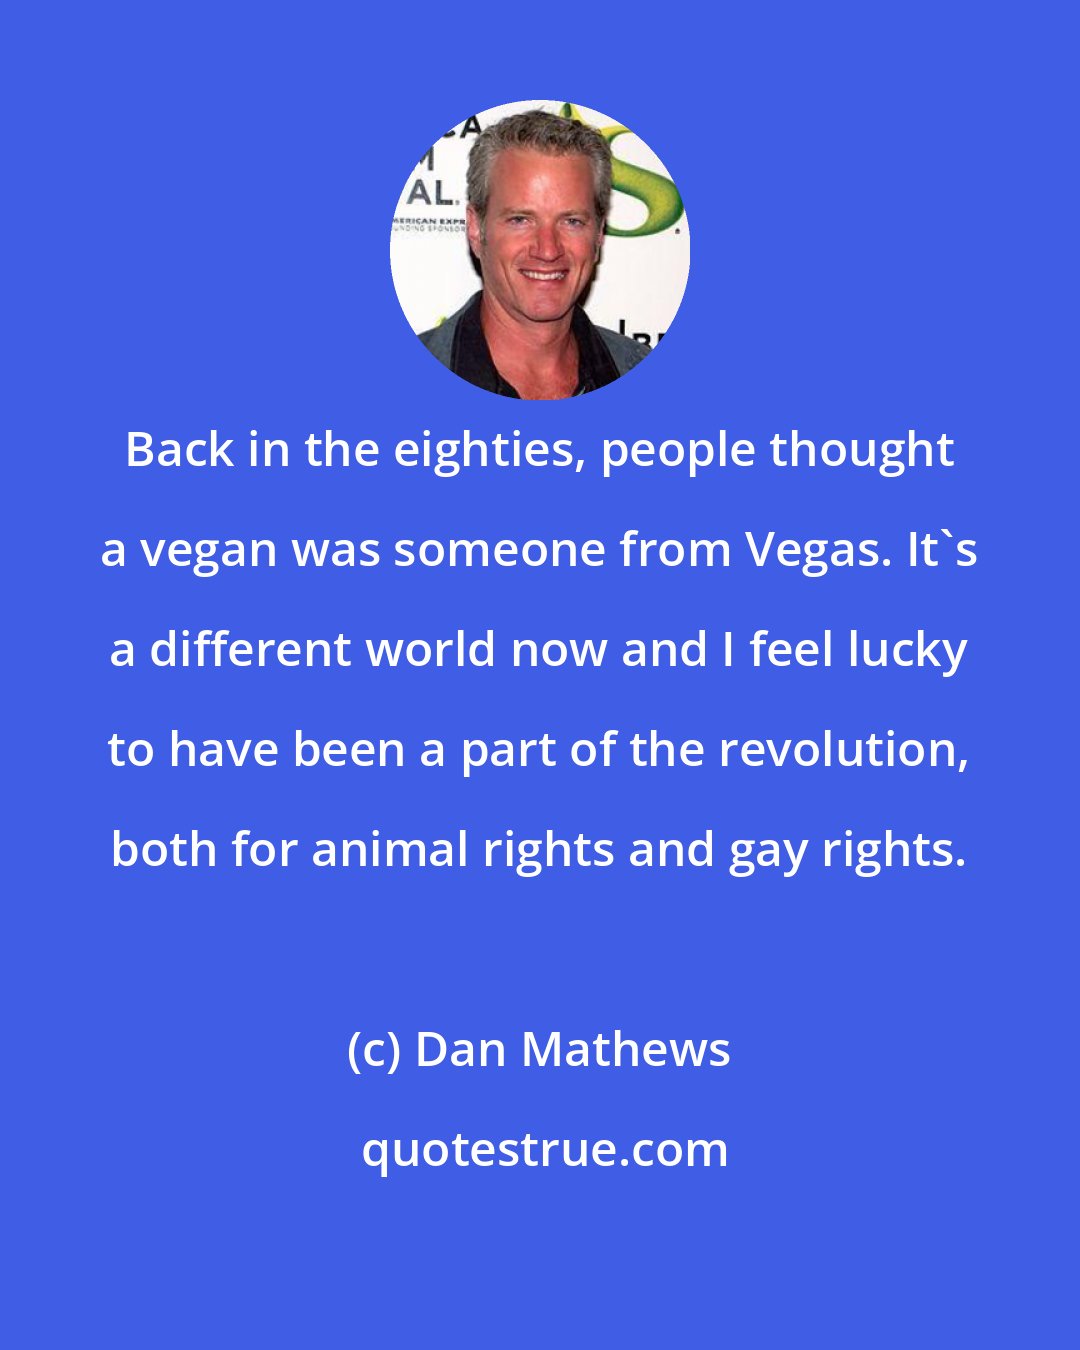 Dan Mathews: Back in the eighties, people thought a vegan was someone from Vegas. It's a different world now and I feel lucky to have been a part of the revolution, both for animal rights and gay rights.